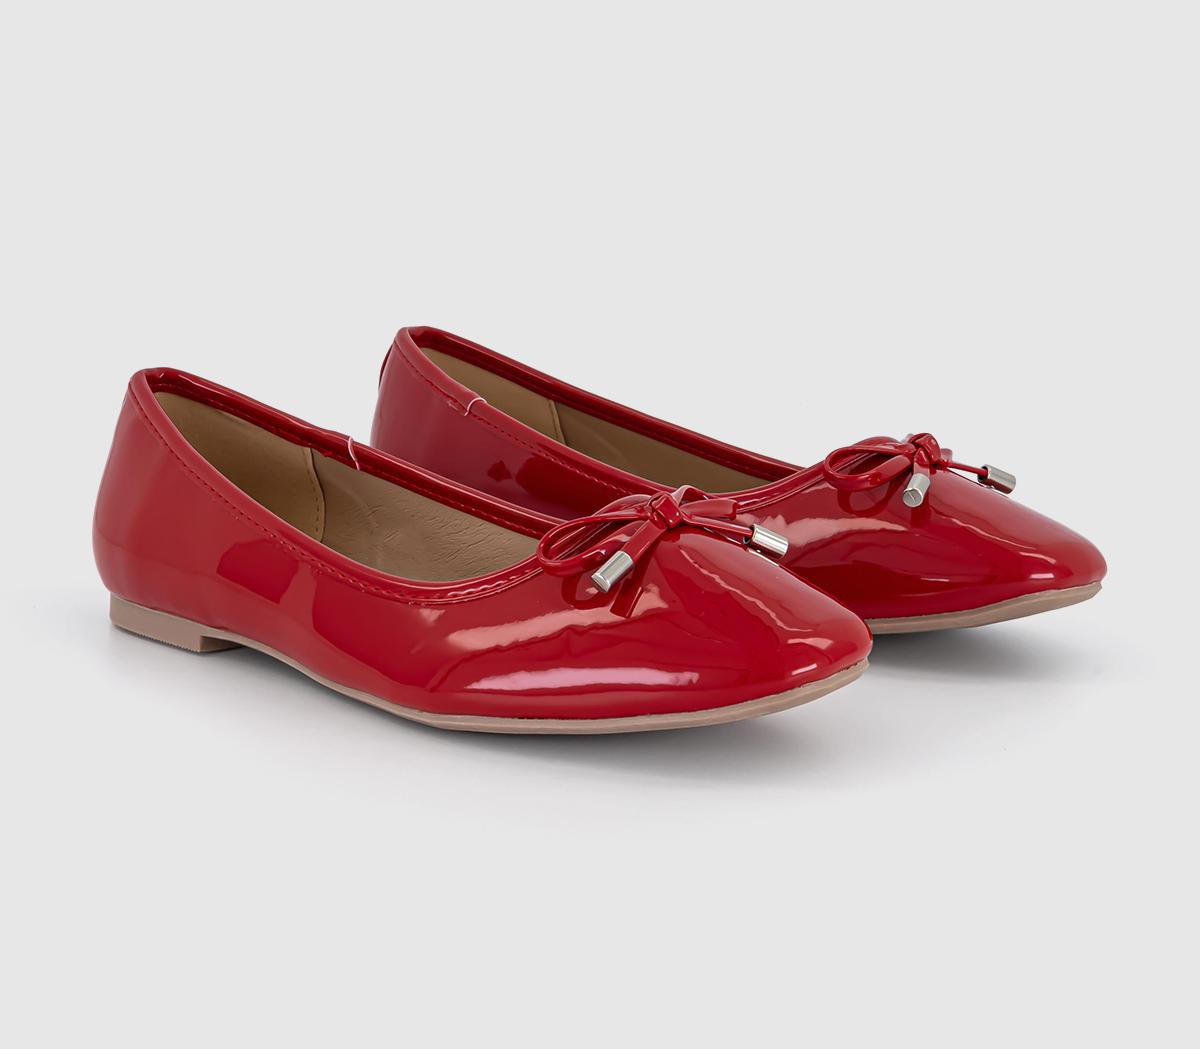 OFFICE Womens Flora Bow Detail Ballet Pumps Red Patent, 9